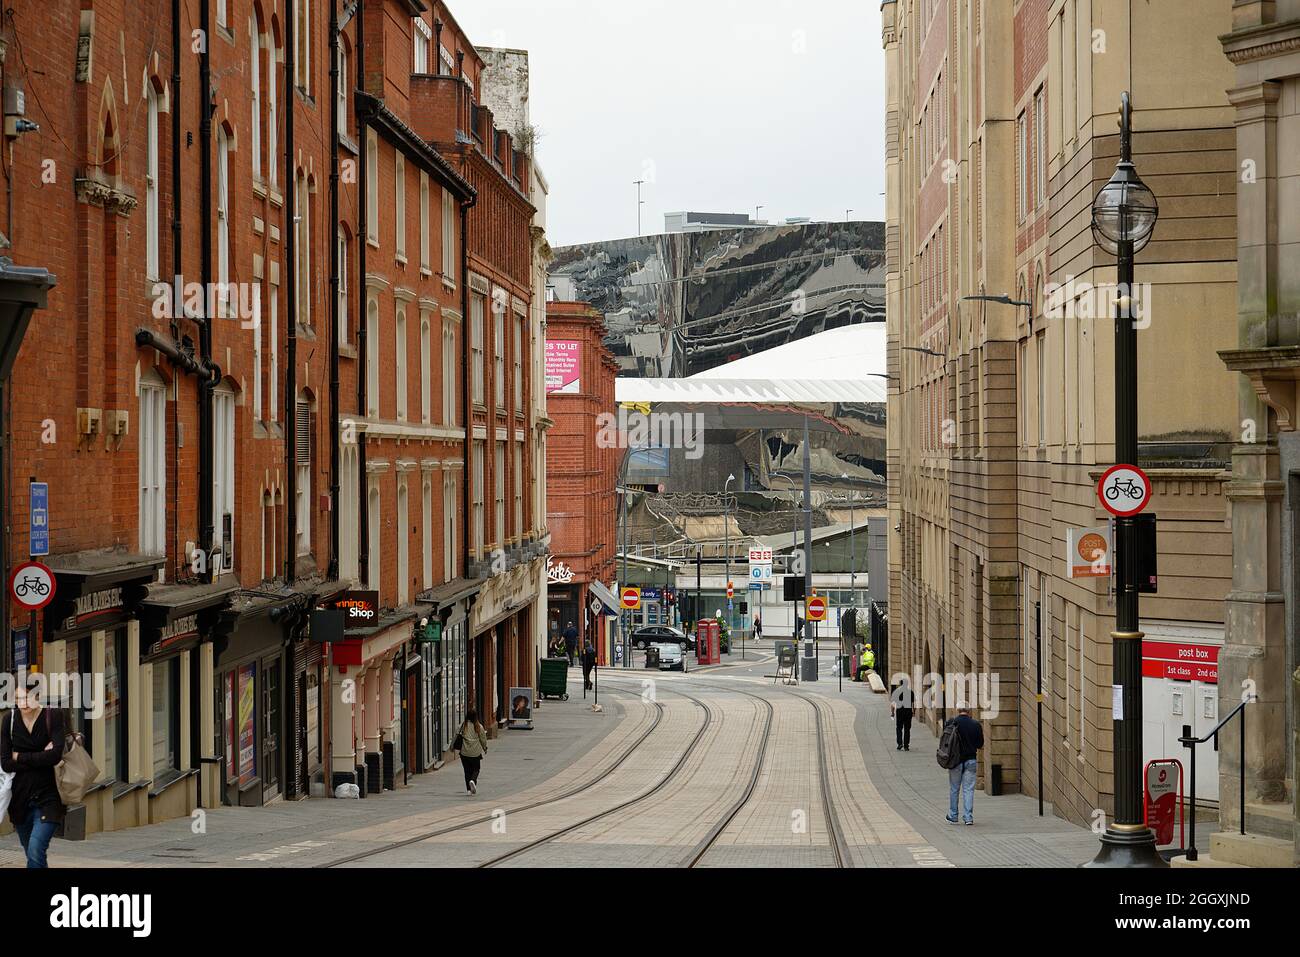 Pinfold Street and buildings in Birmingham, West Midlands, England, UK. Birmingham New Street station in the distance. Stock Photo